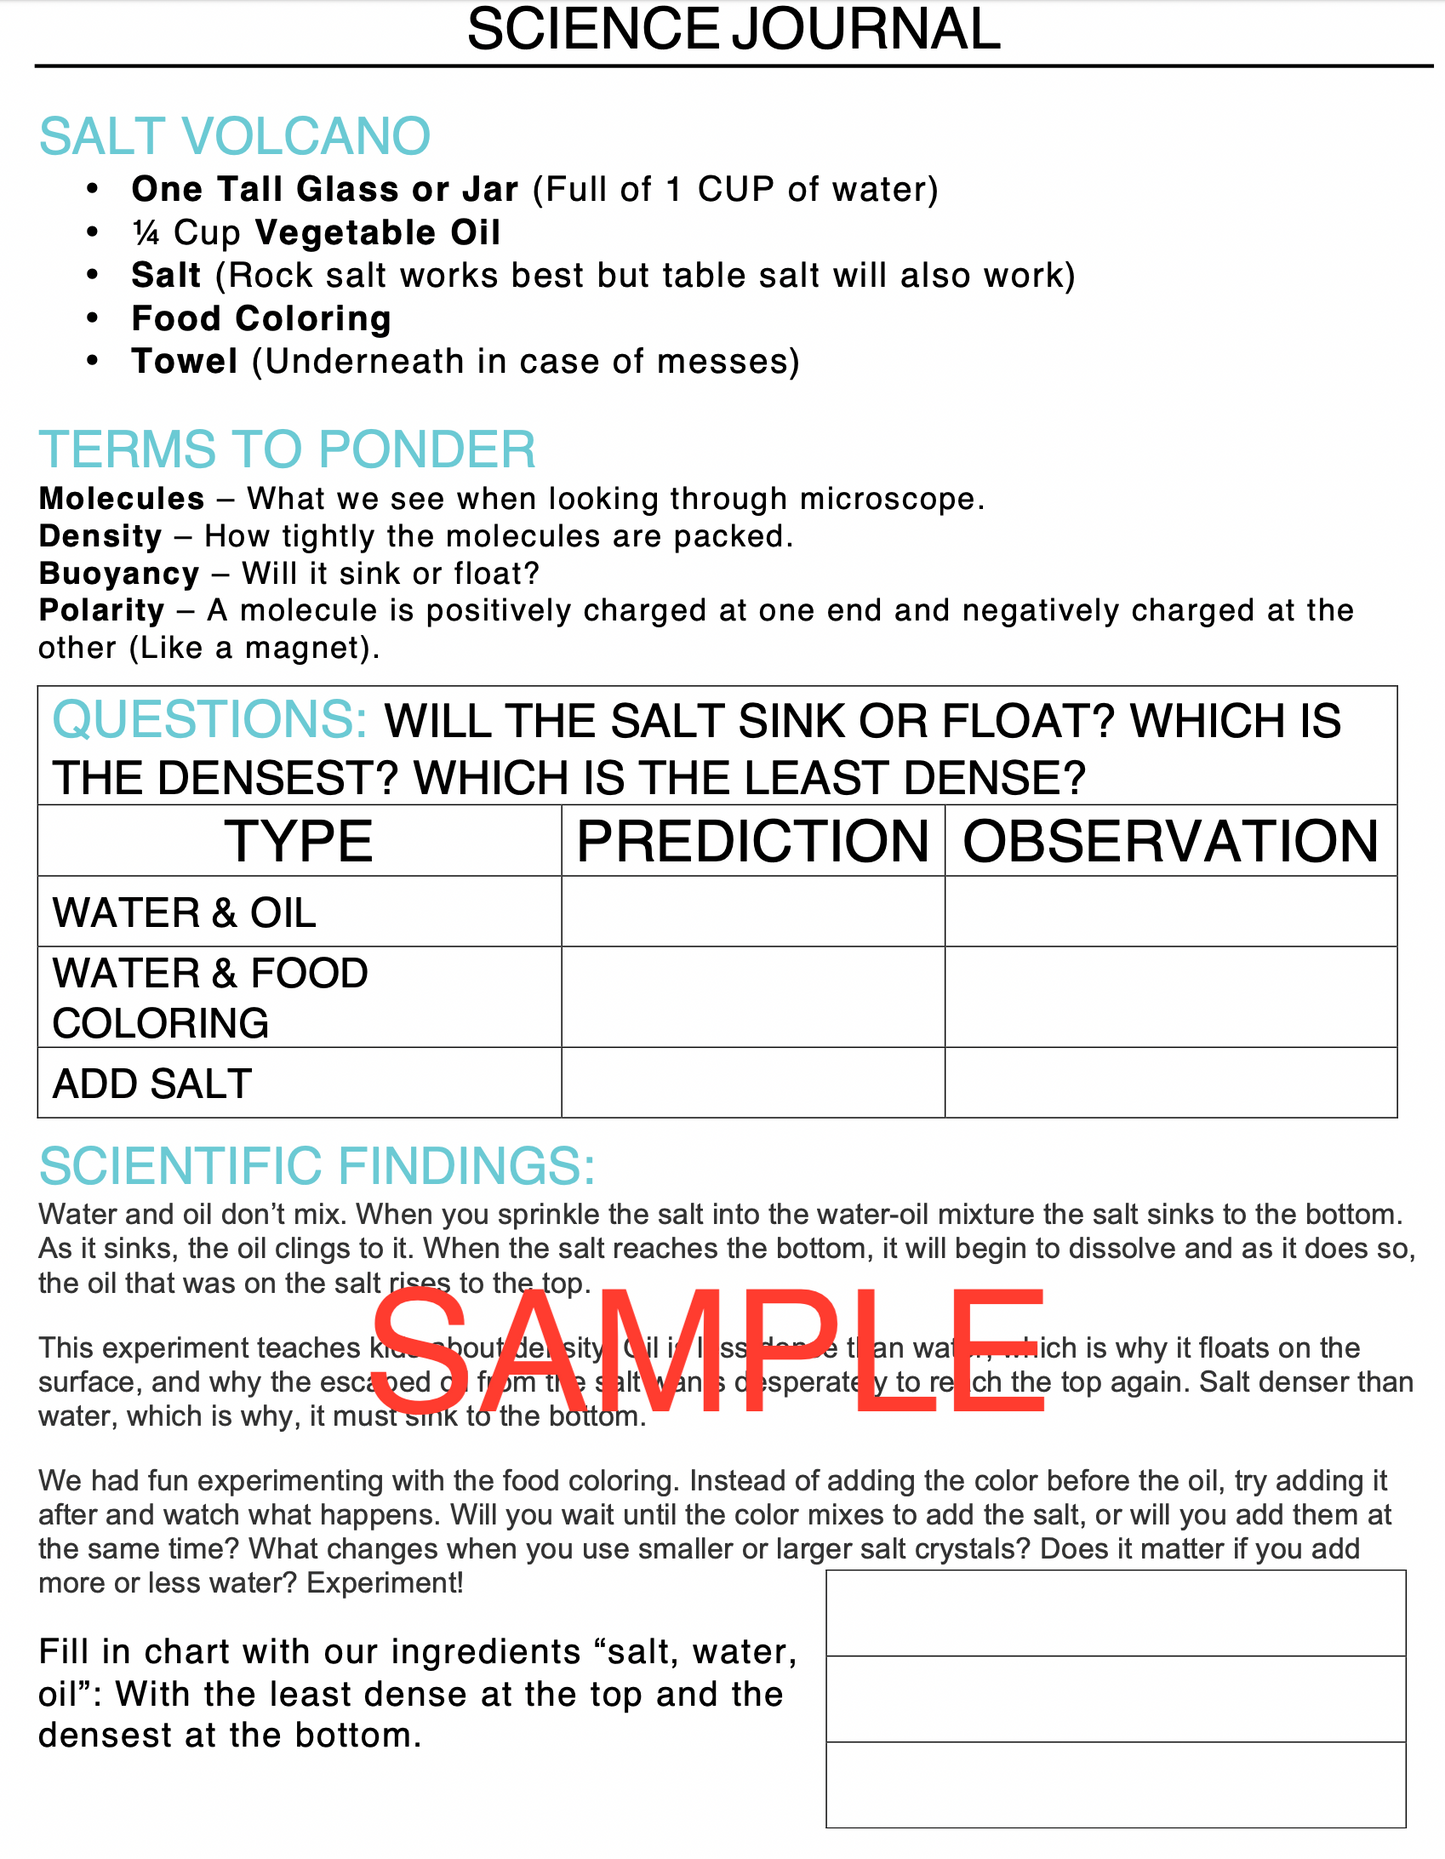 Salt Volcano Science Experiment Journal & Step-By-Step Instructions